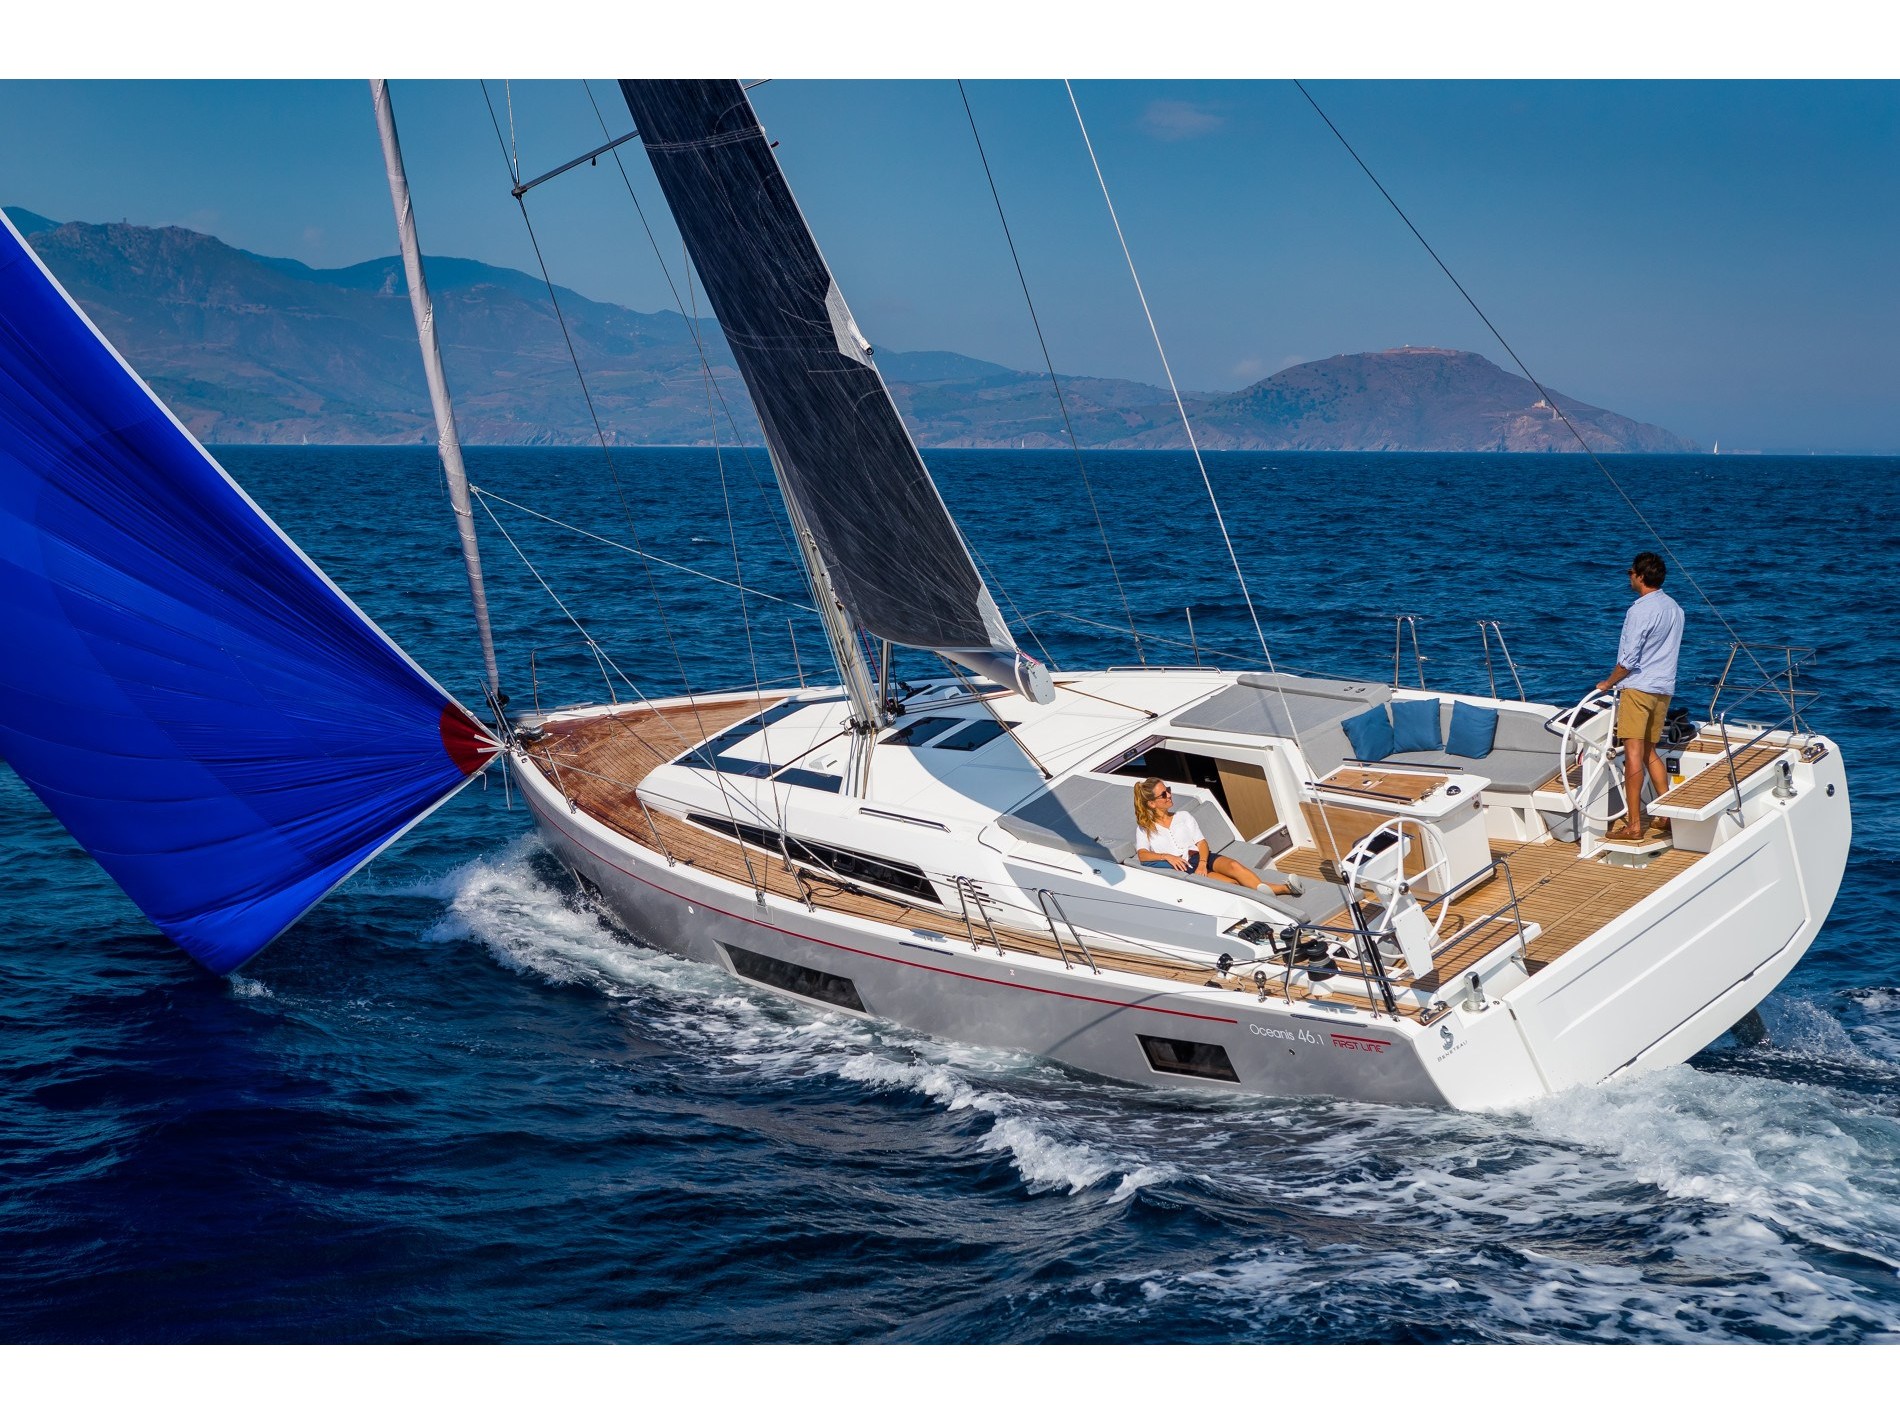 Yacht charter Oceanis 46.1 - Italy, Tuscany, Castiglioncello